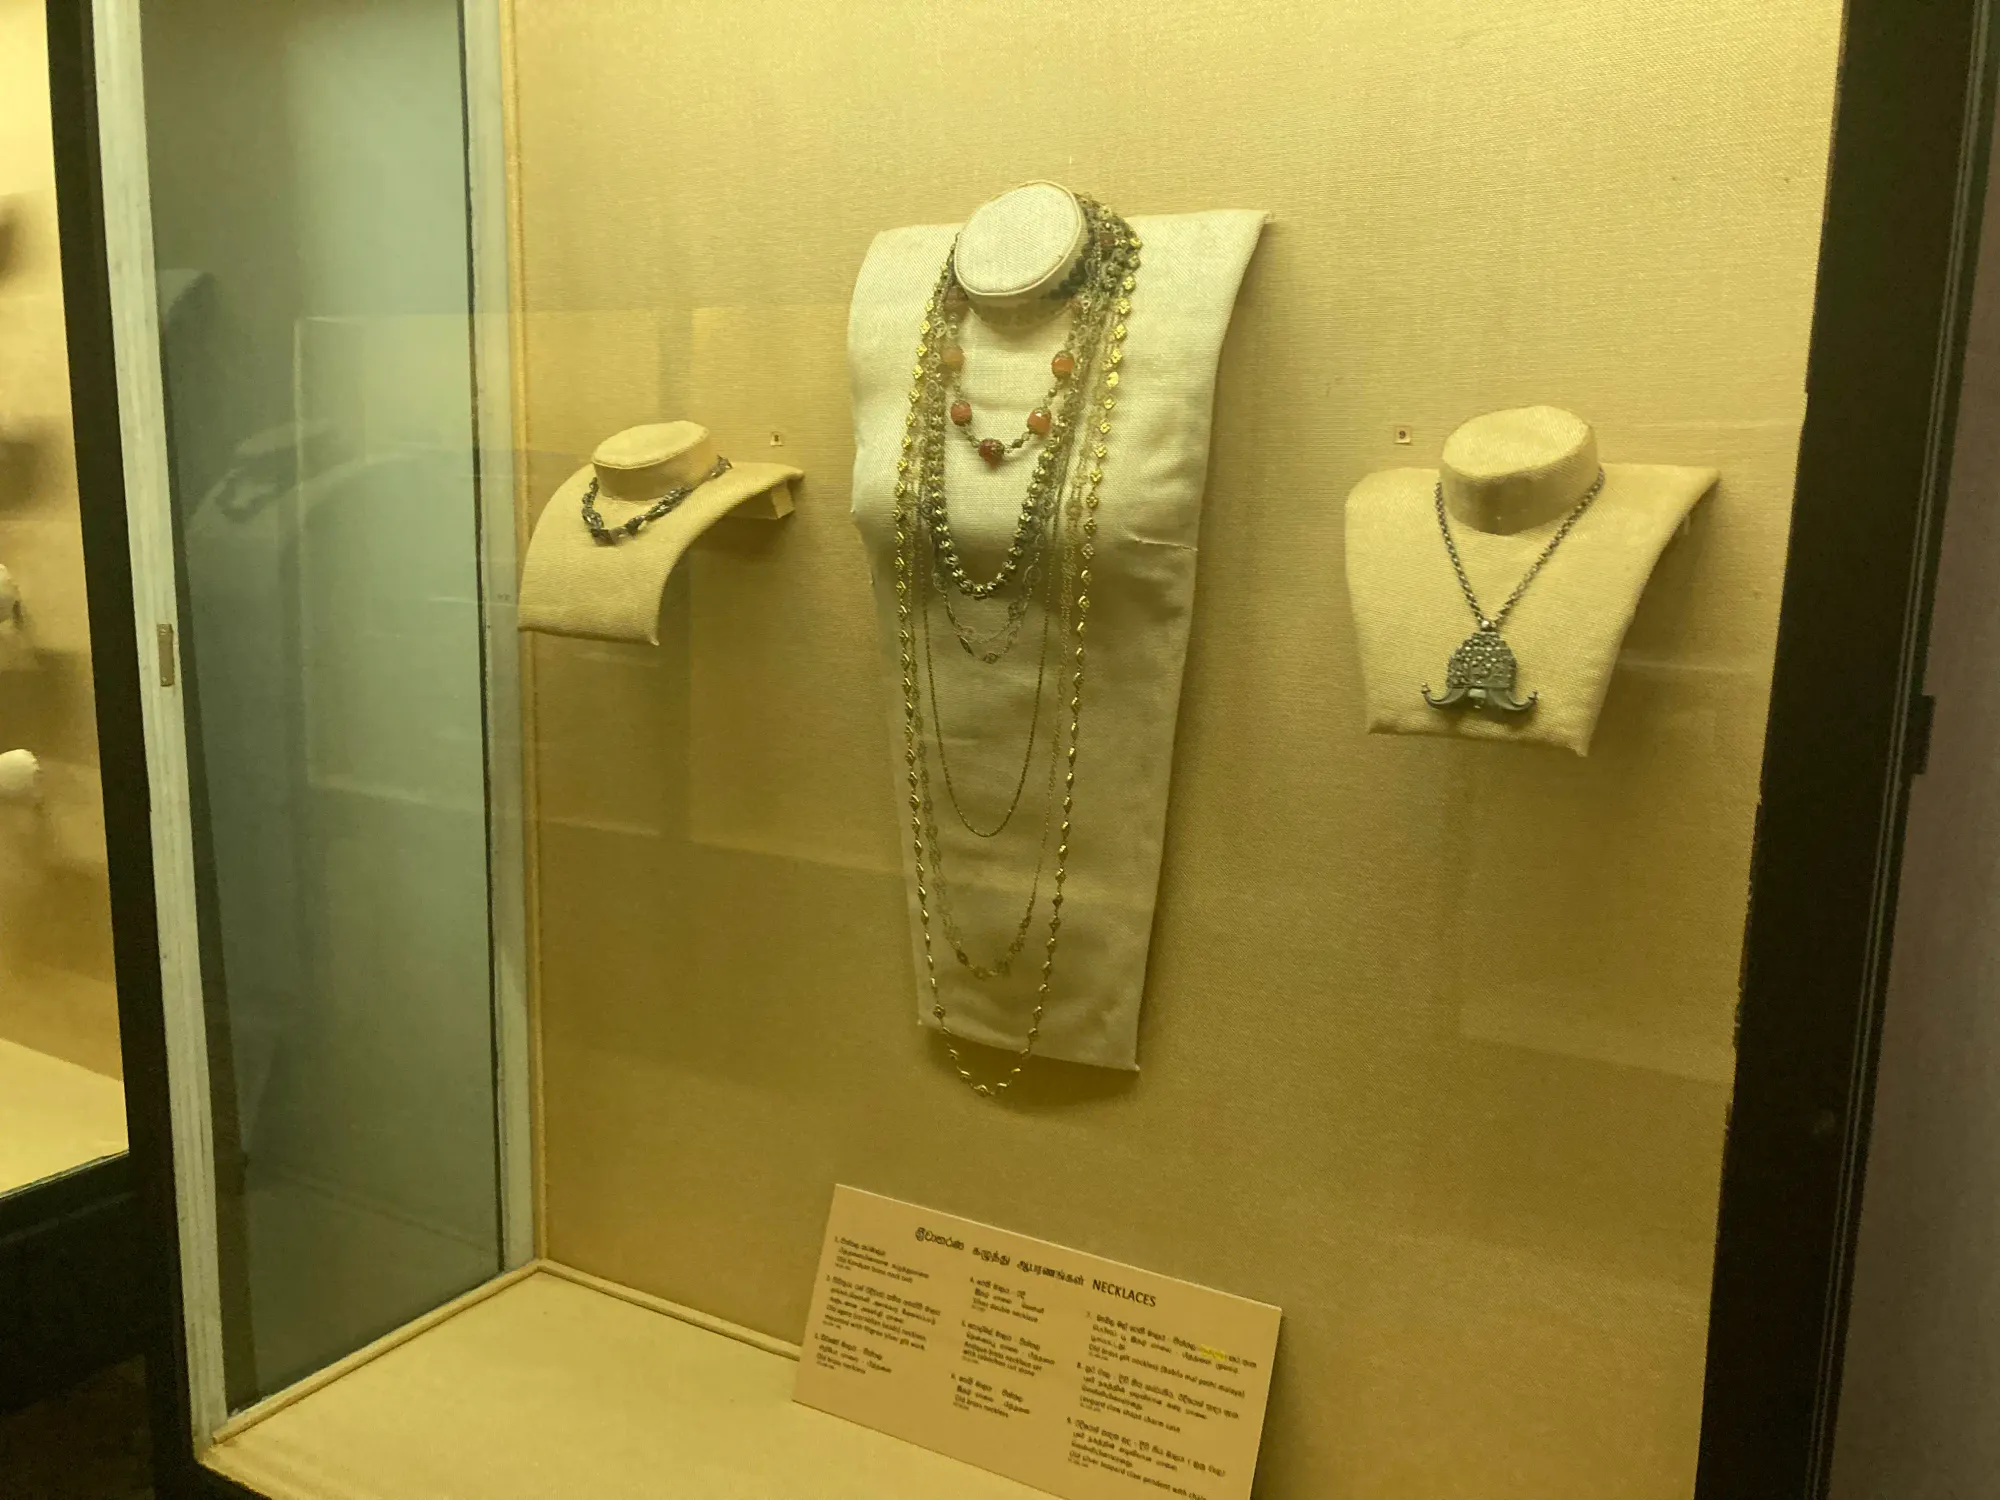 Necklaces of Kandyan period displayed at the Kandy National Museum, Sri Lanka